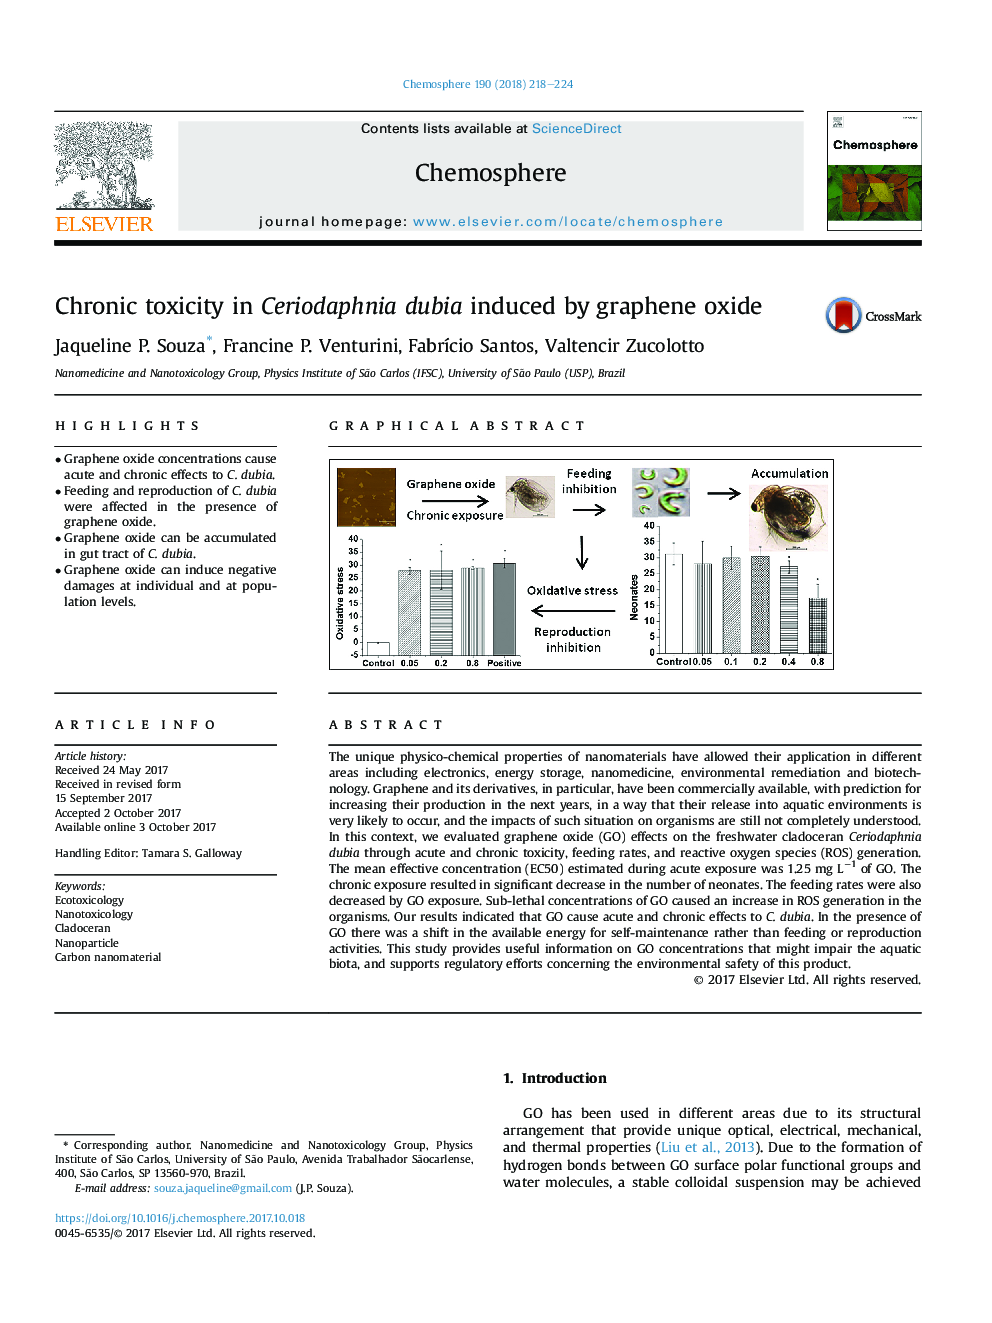 Chronic toxicity in Ceriodaphnia dubia induced by graphene oxide